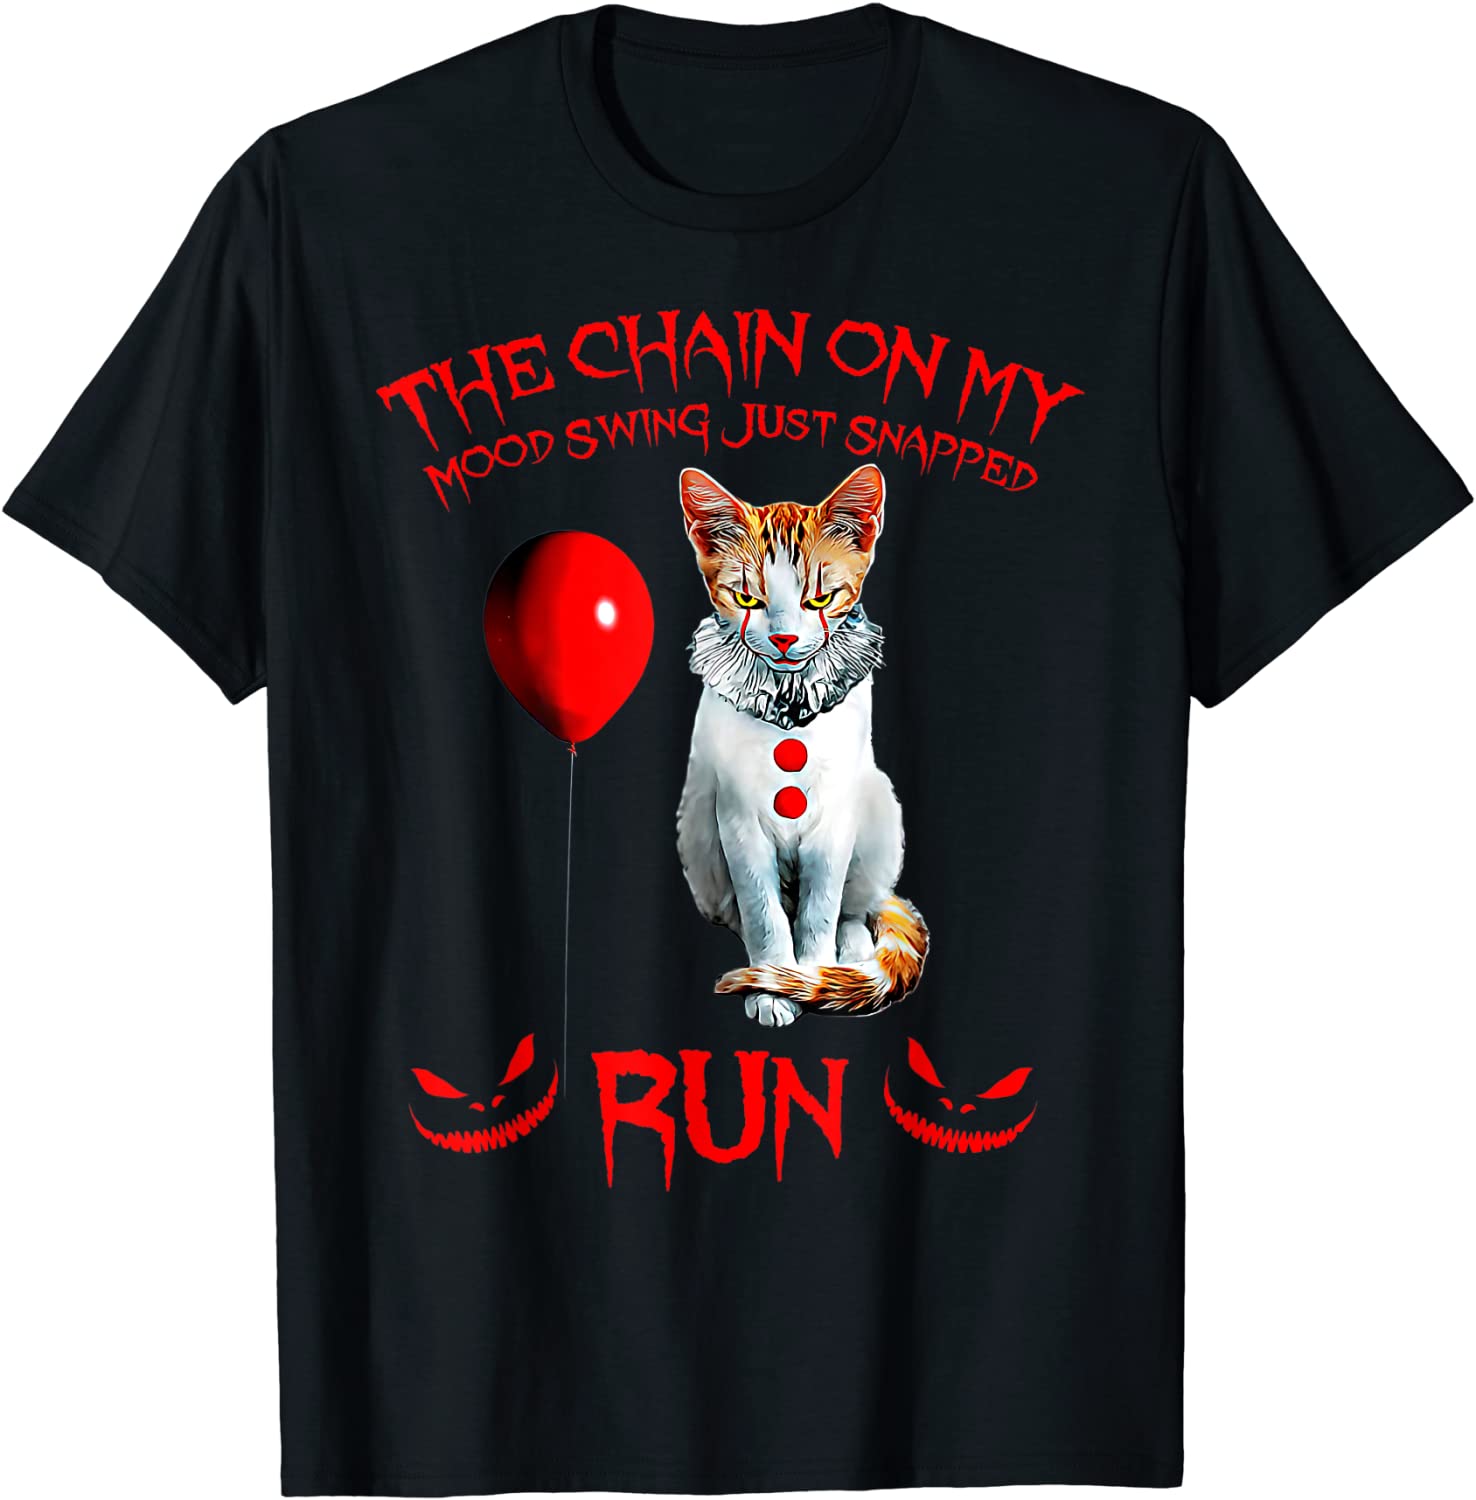 Funny Cat The Chain On My Mood Swing Just Snapped Run T-Shirt - ReviewsTees